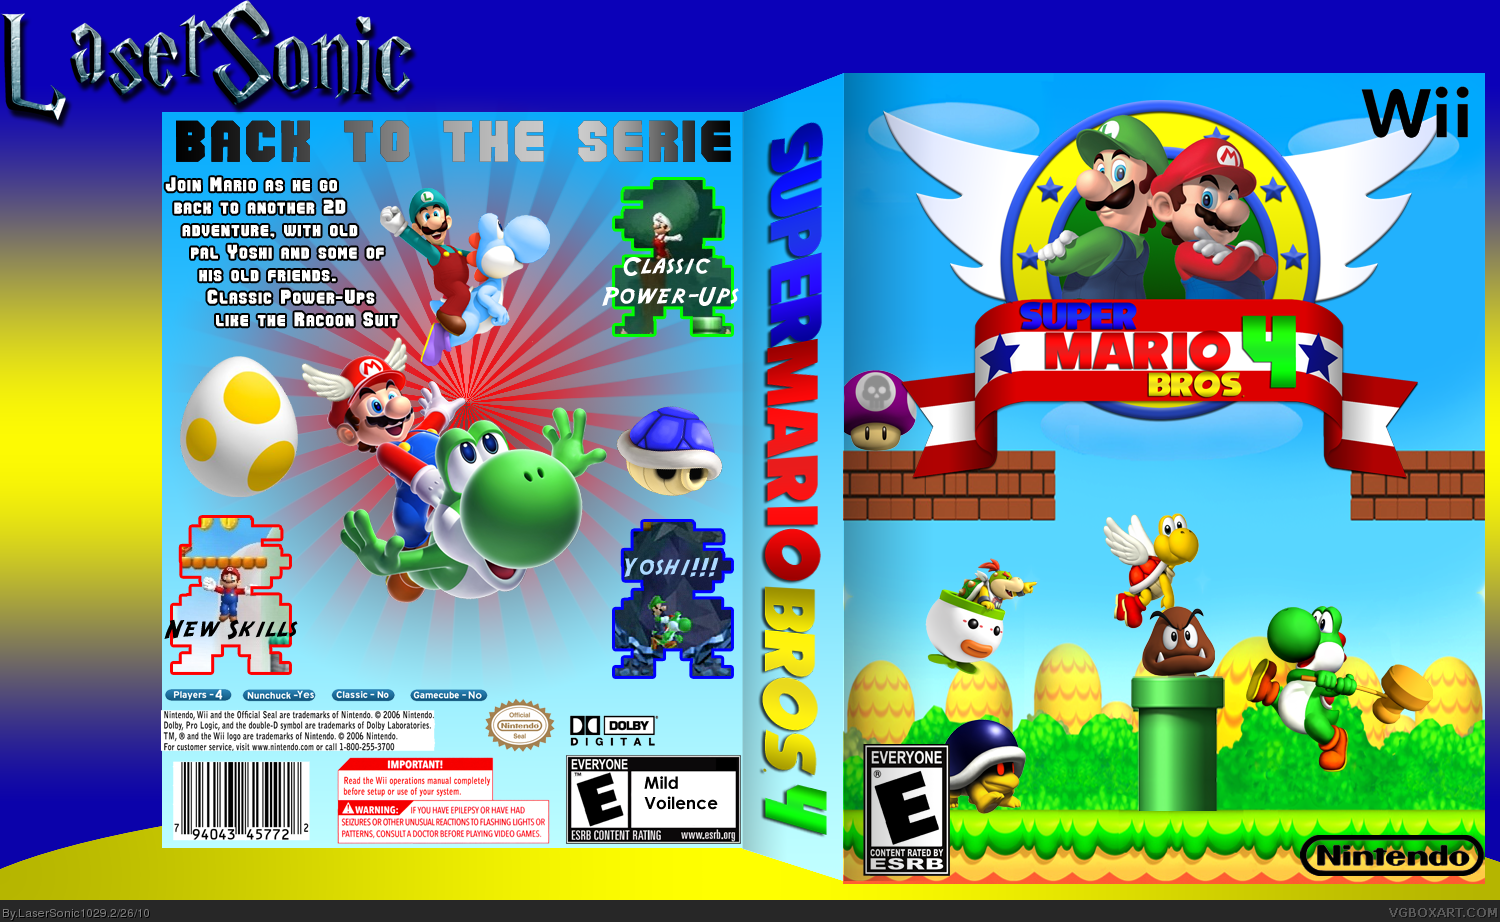 Super Mario Bros. 4 Wii Box Art Cover by LaserSonic1029